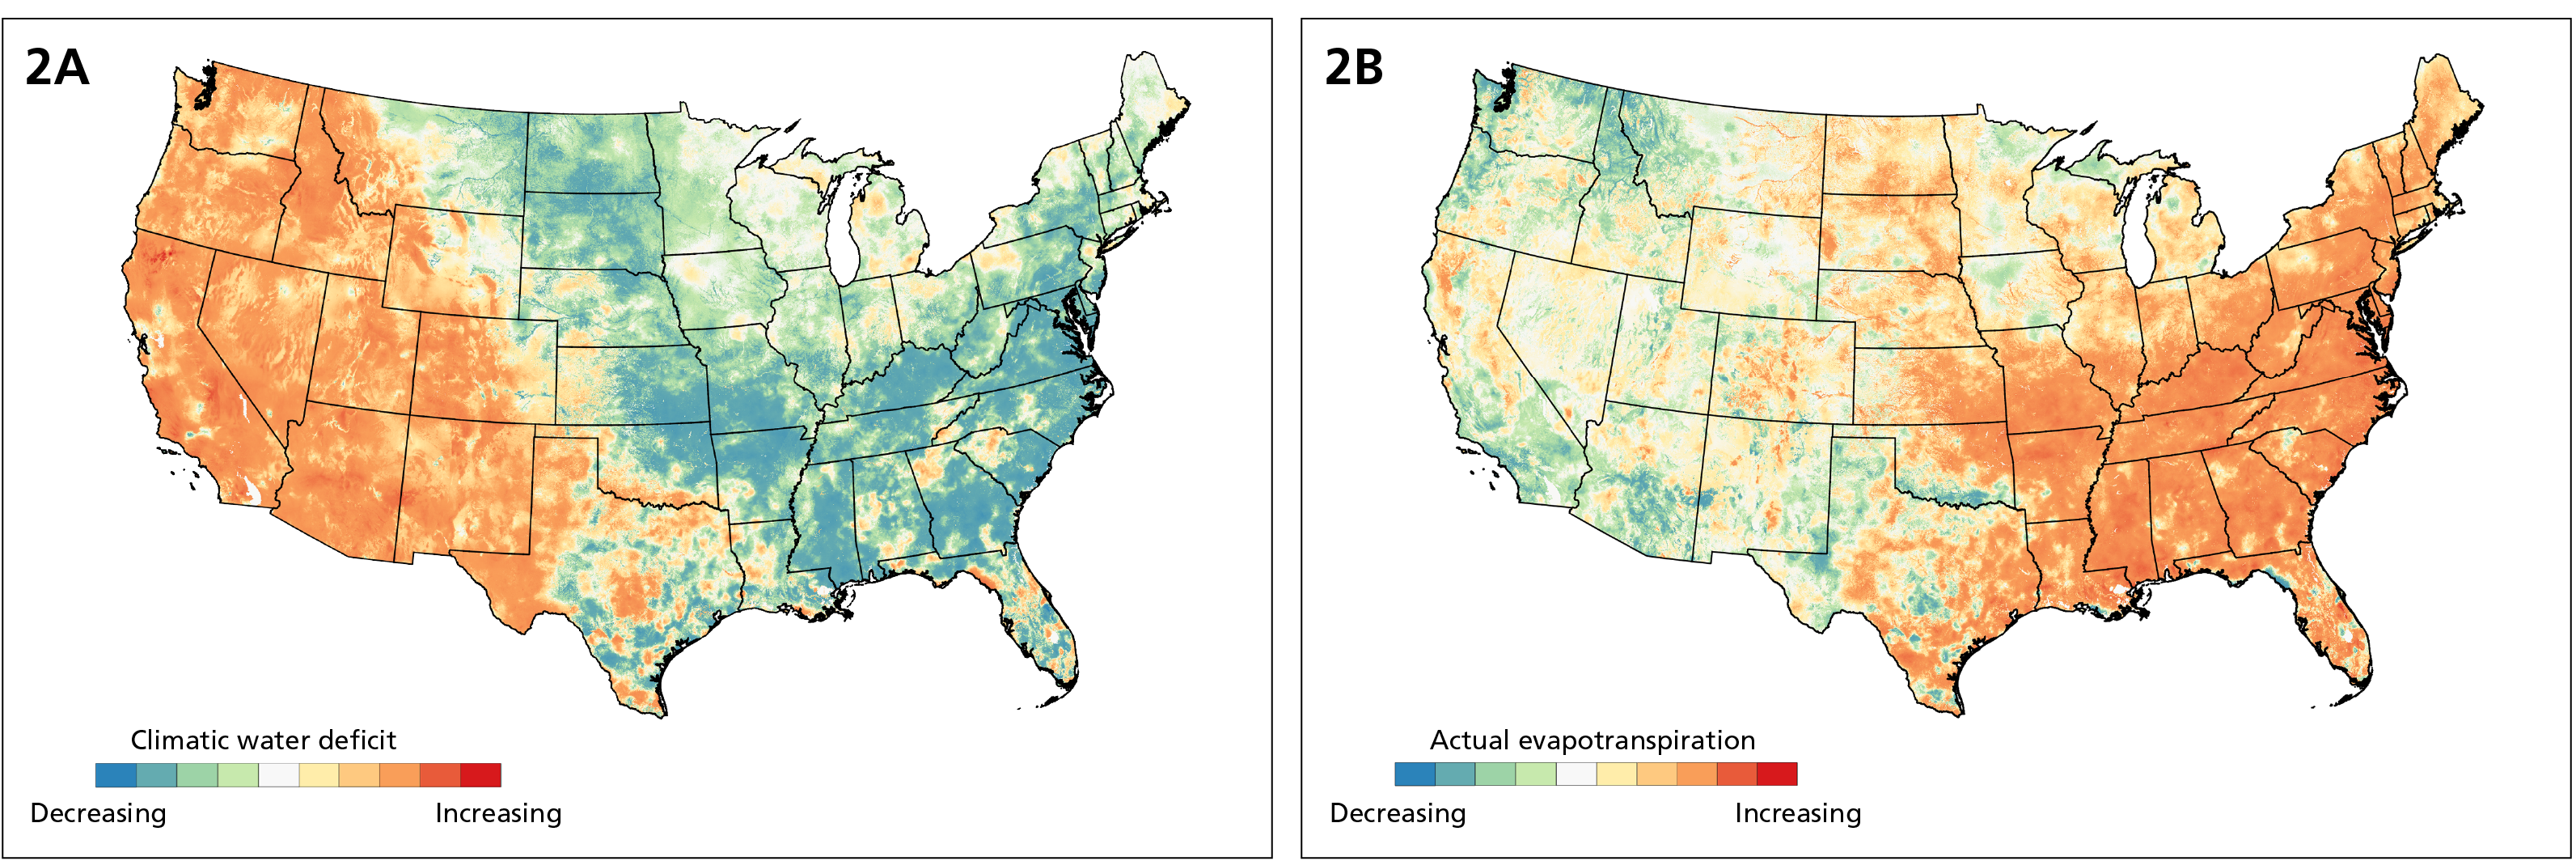 Two maps of US. One shows water deficit higher in the West. The other shows AET higher in the East.